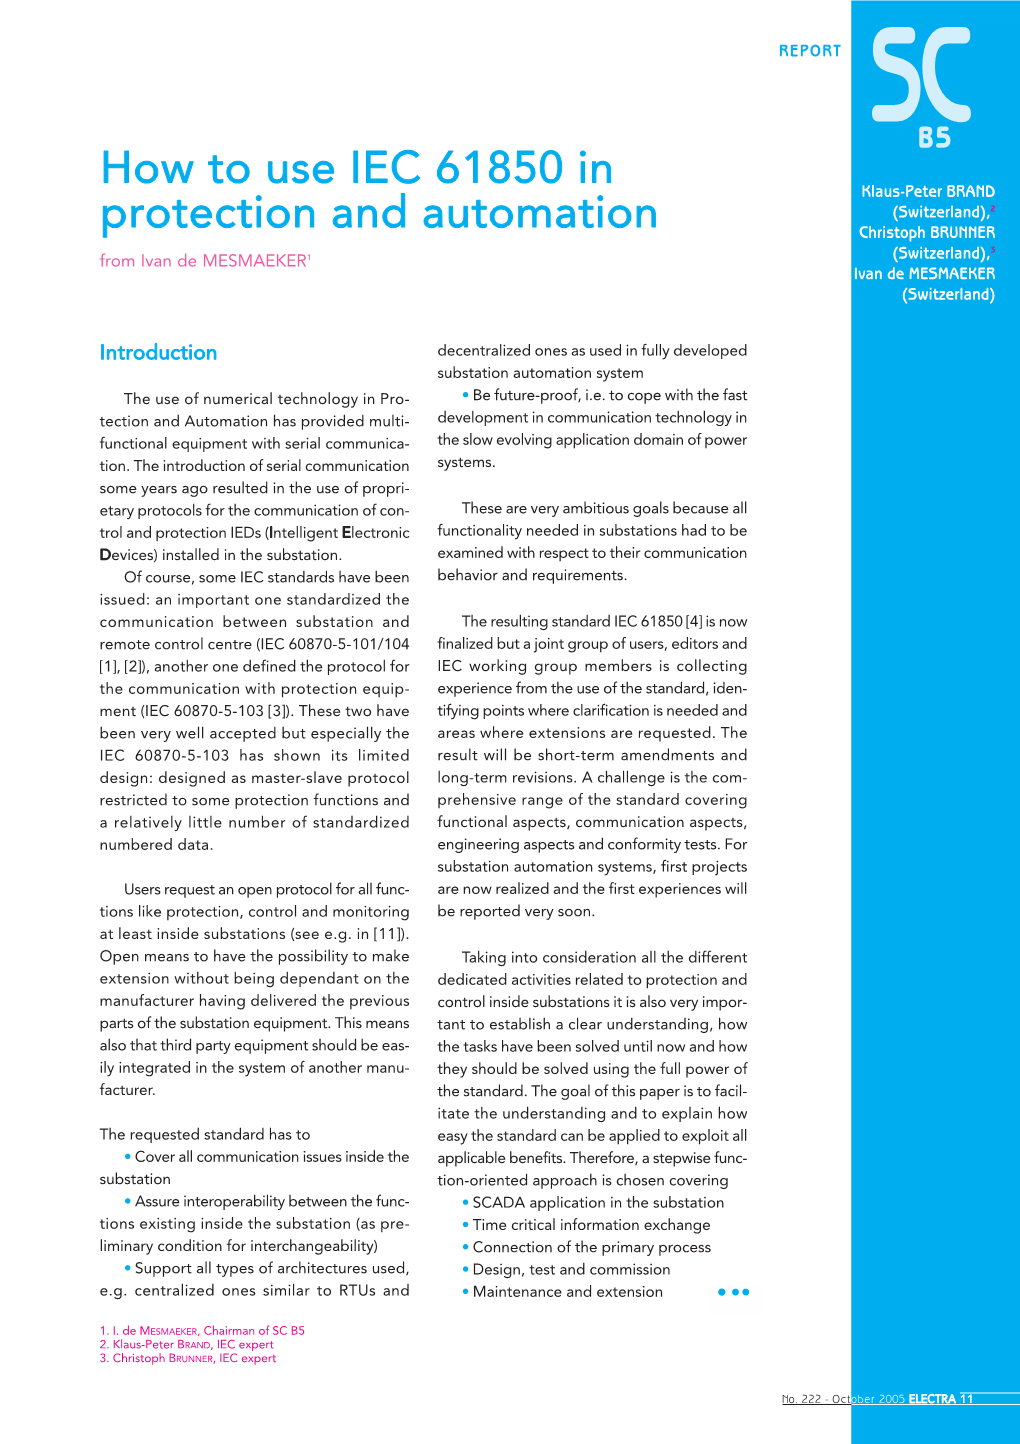 How to Use IEC 61850 in Protection and Automation